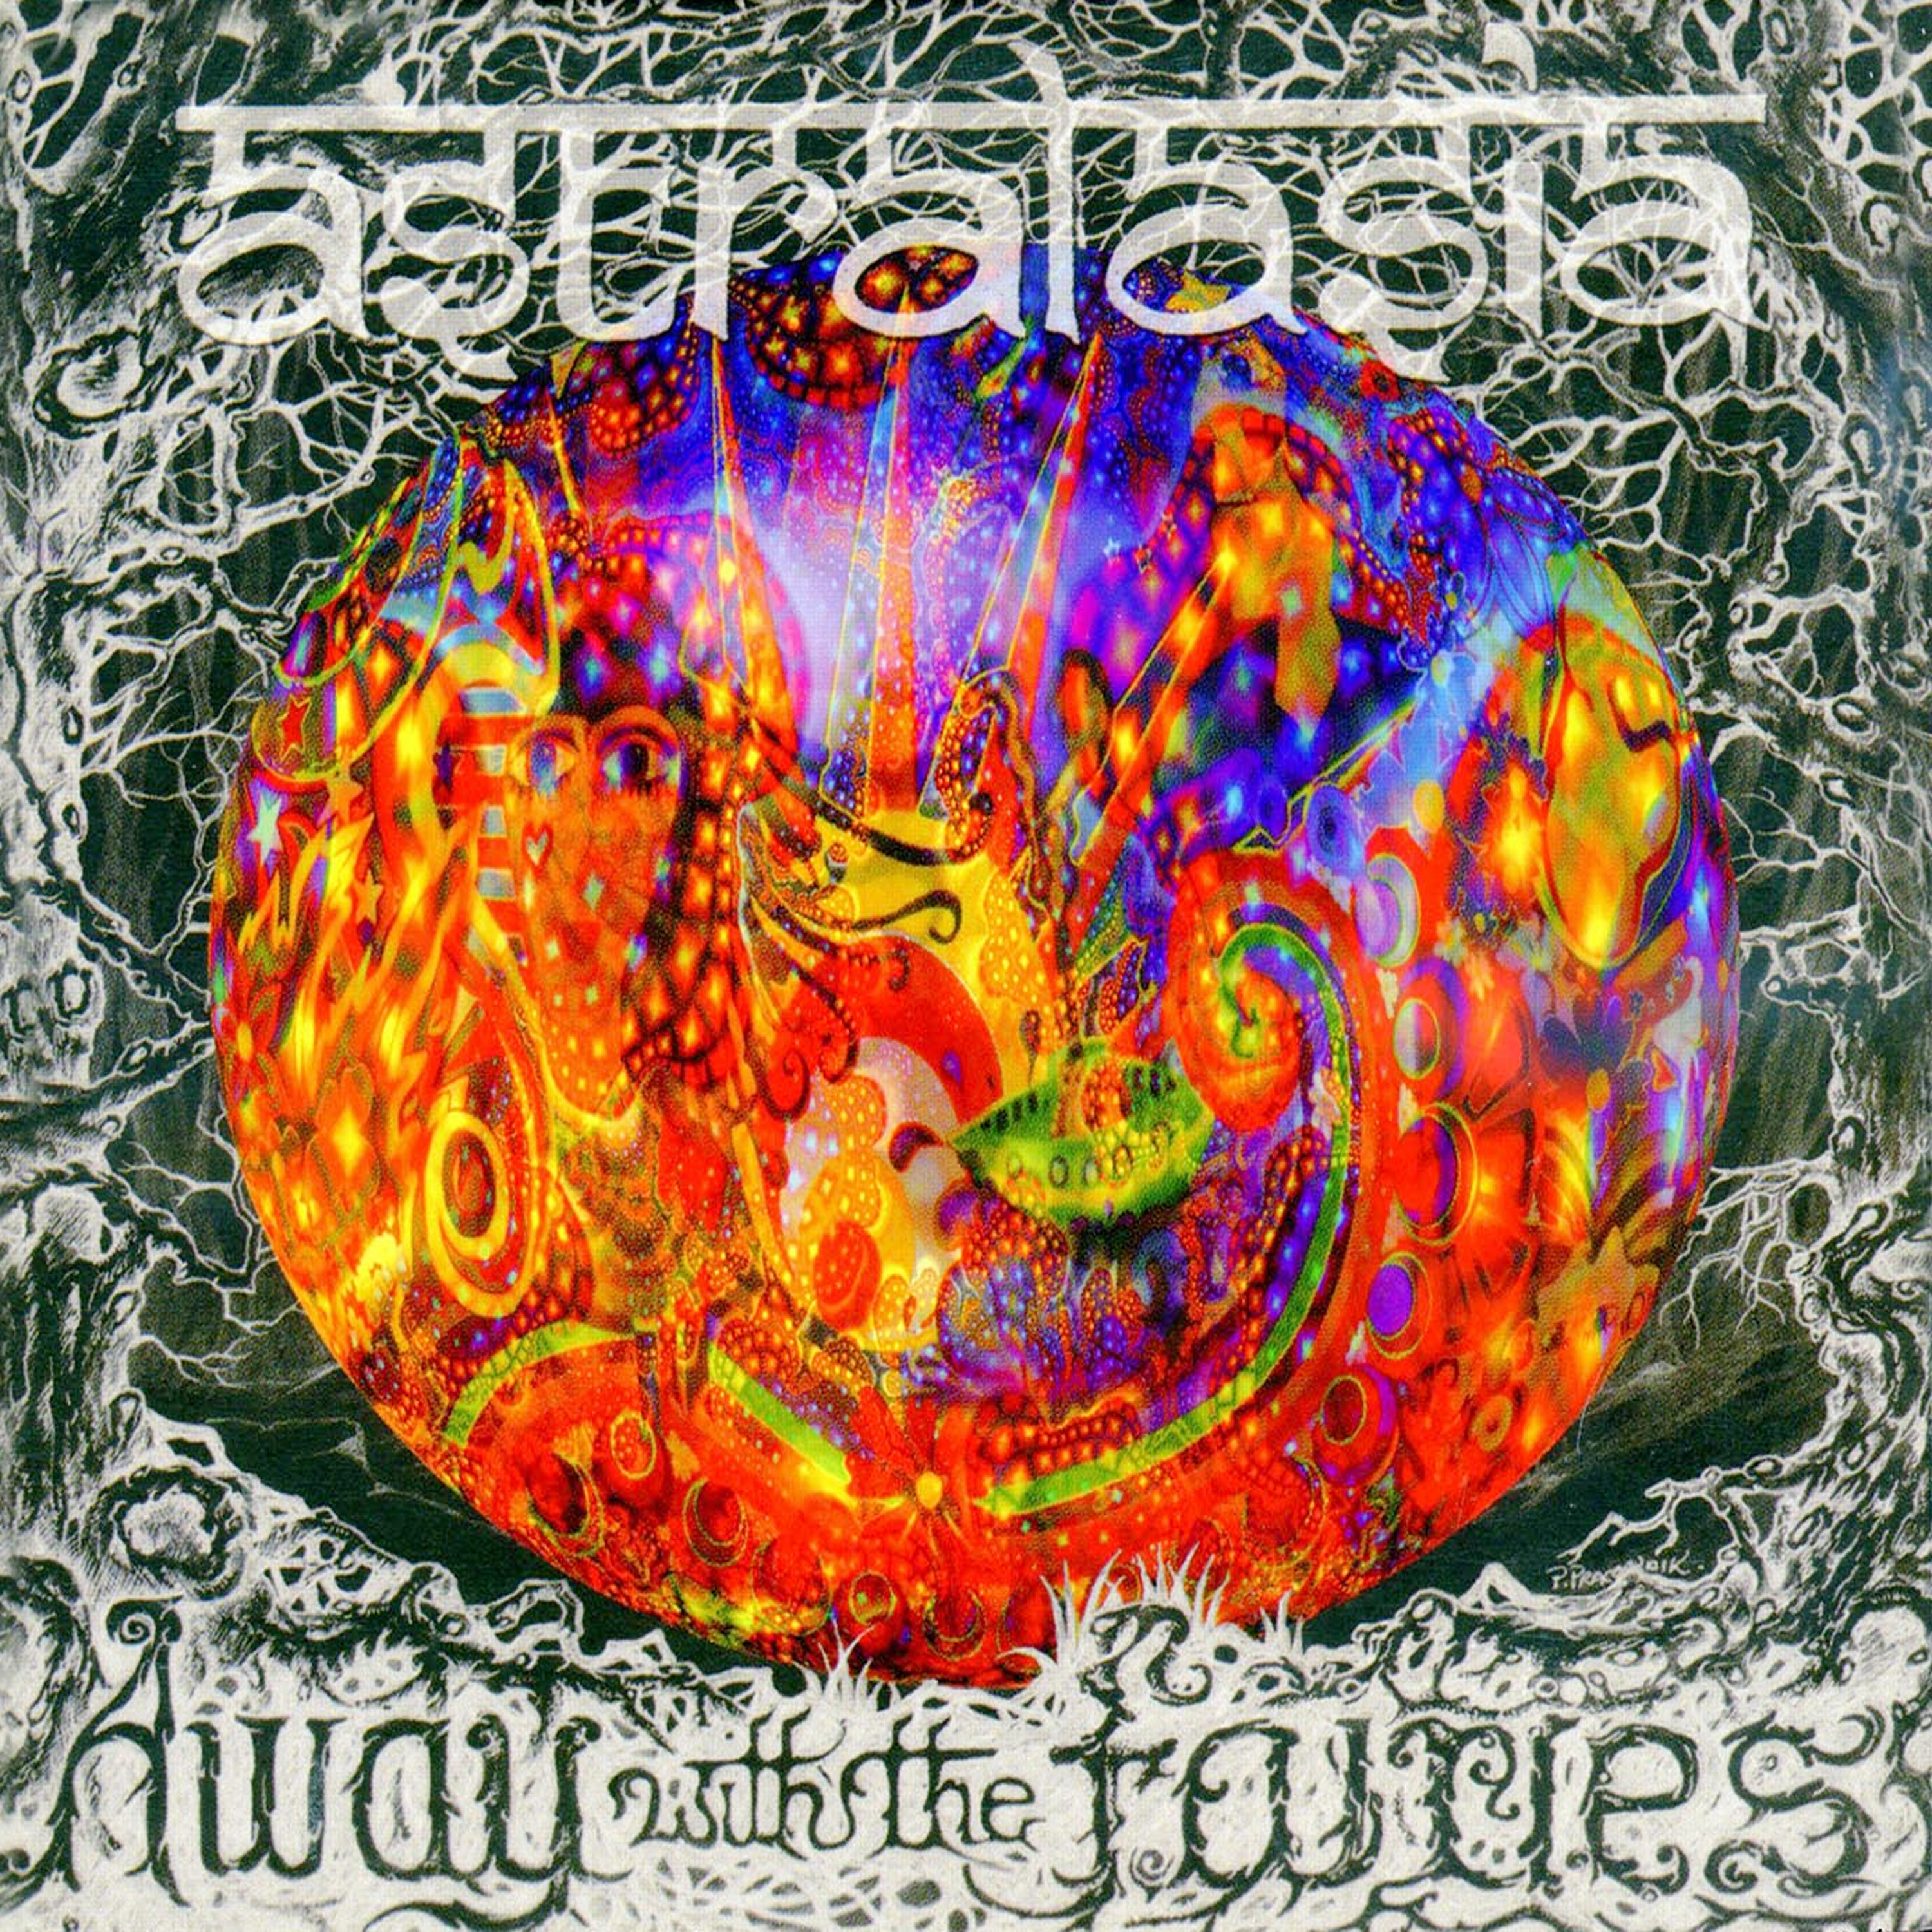 Astralasia - Away With the Fairies